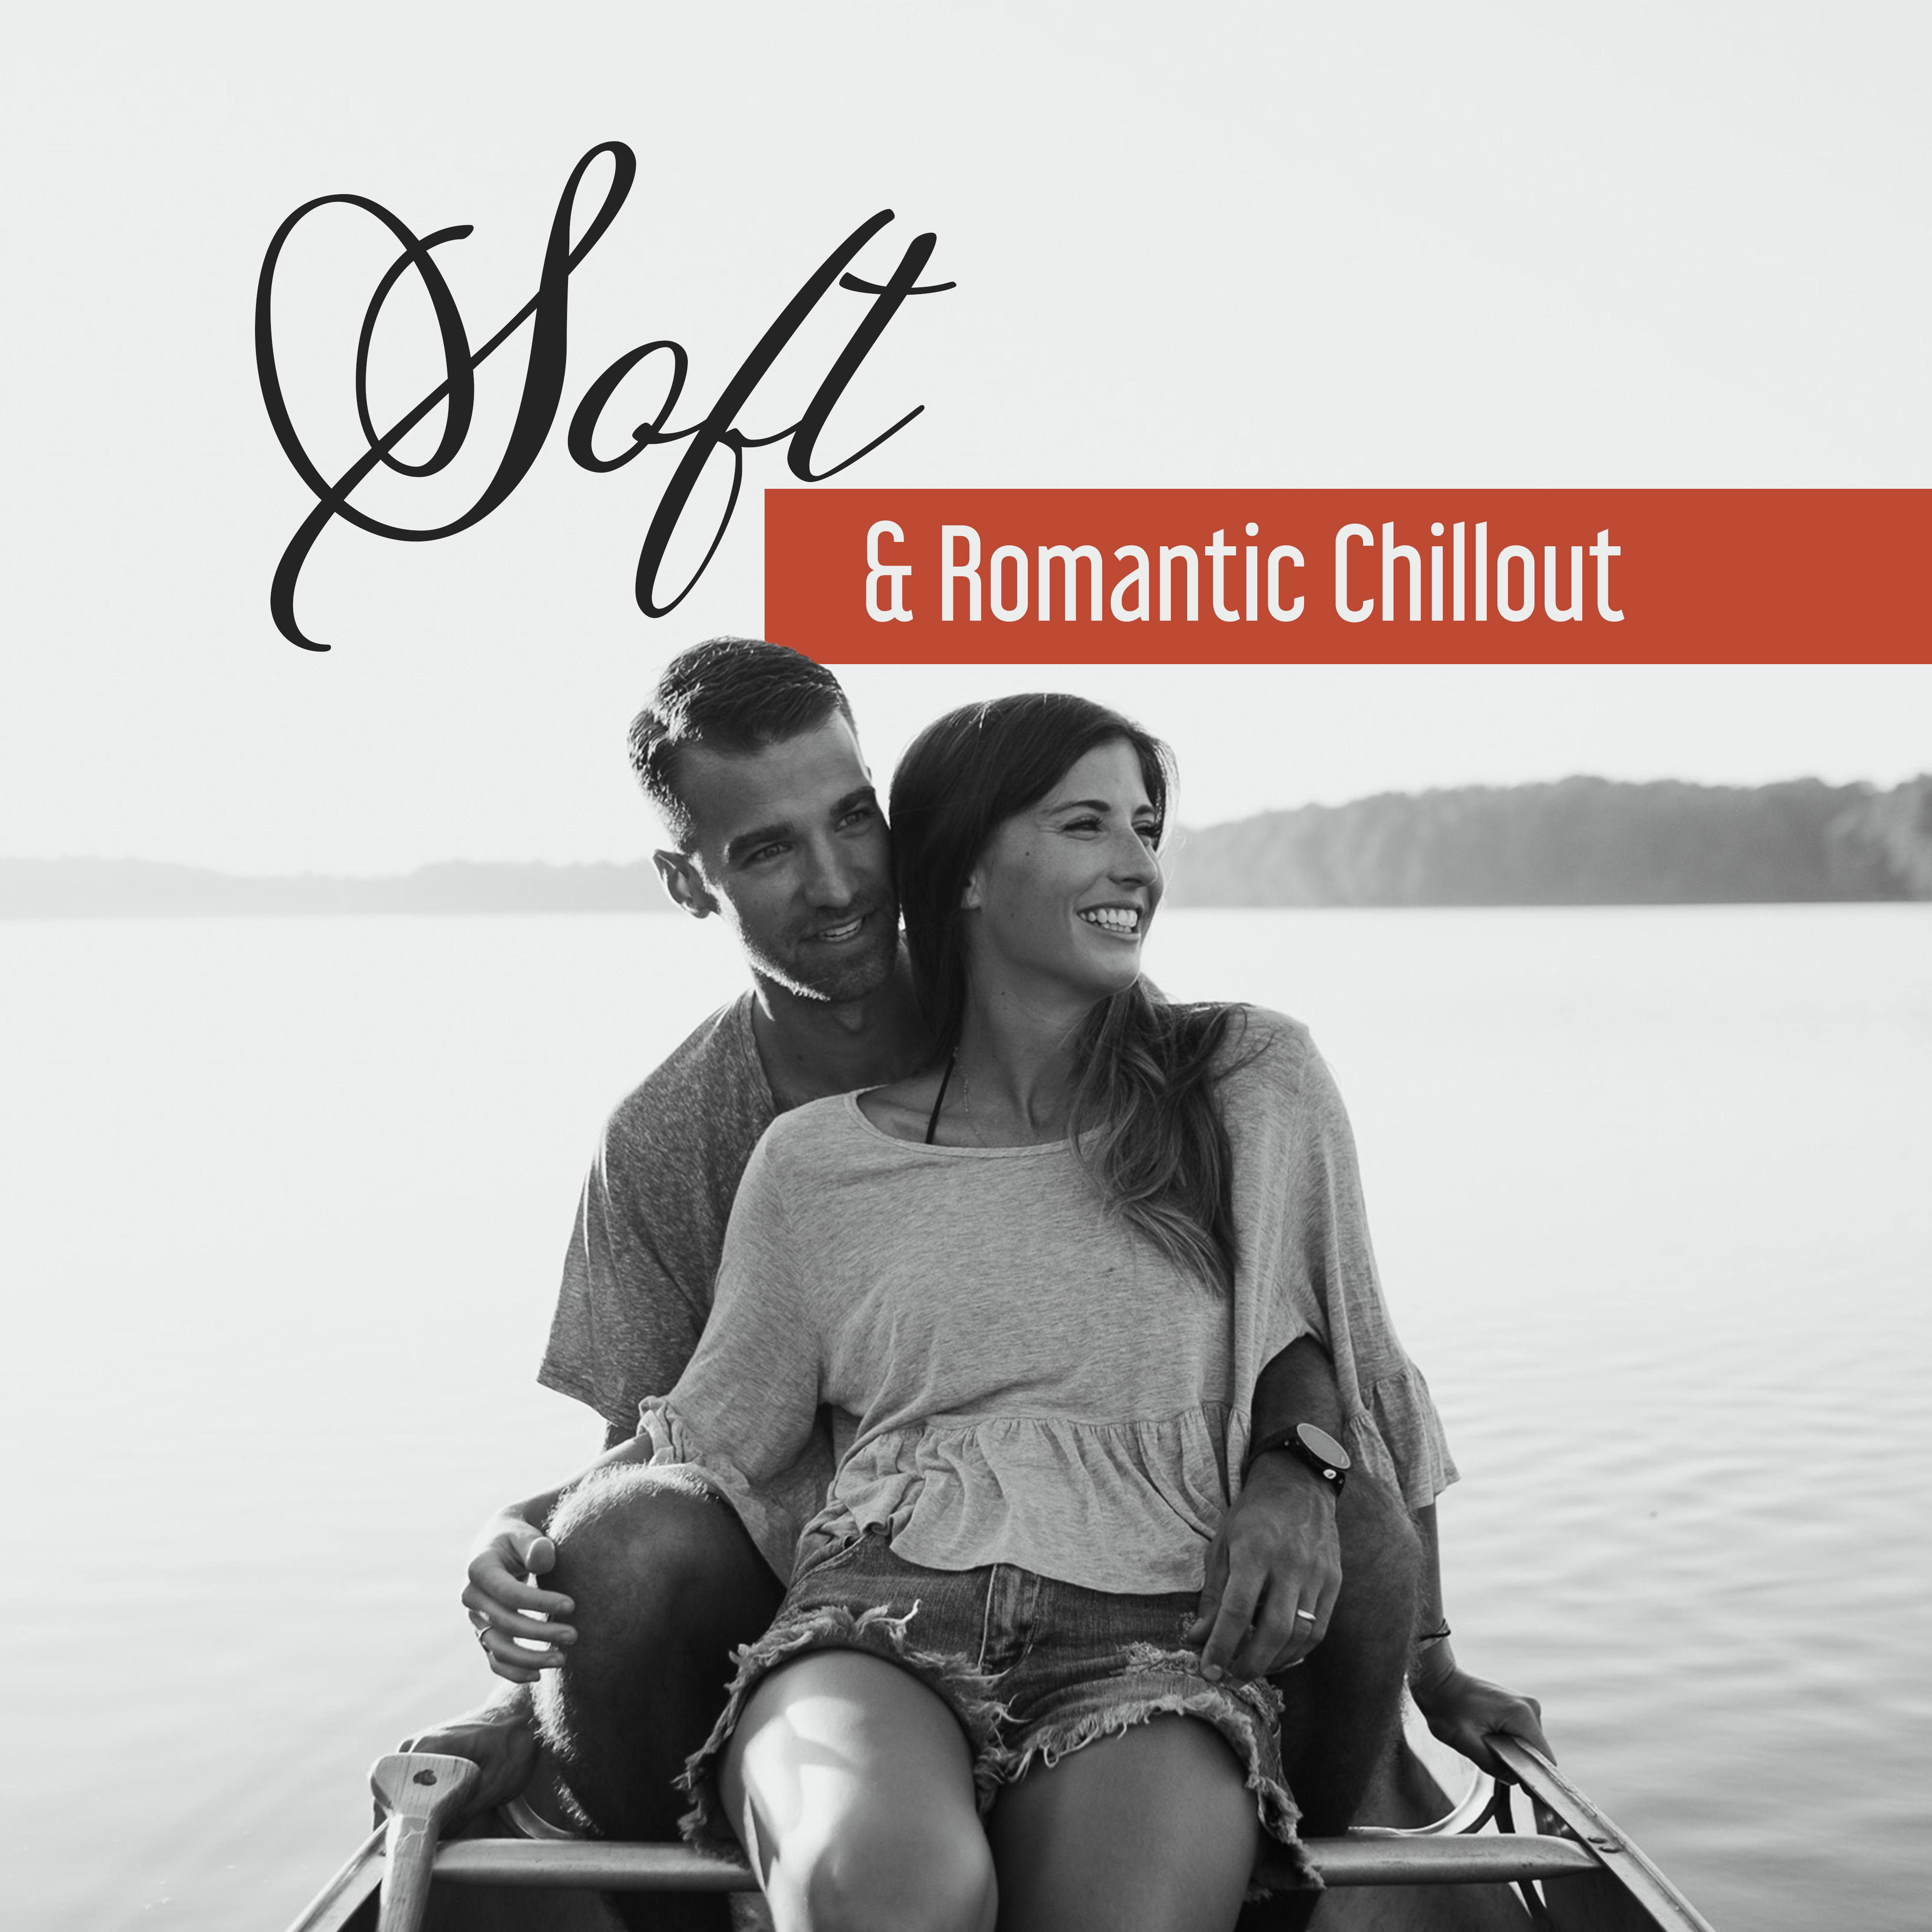 Soft  Romantic Chillout  Easy Listening, Stress Relief, Peaceful Music,  Chill Out Beats